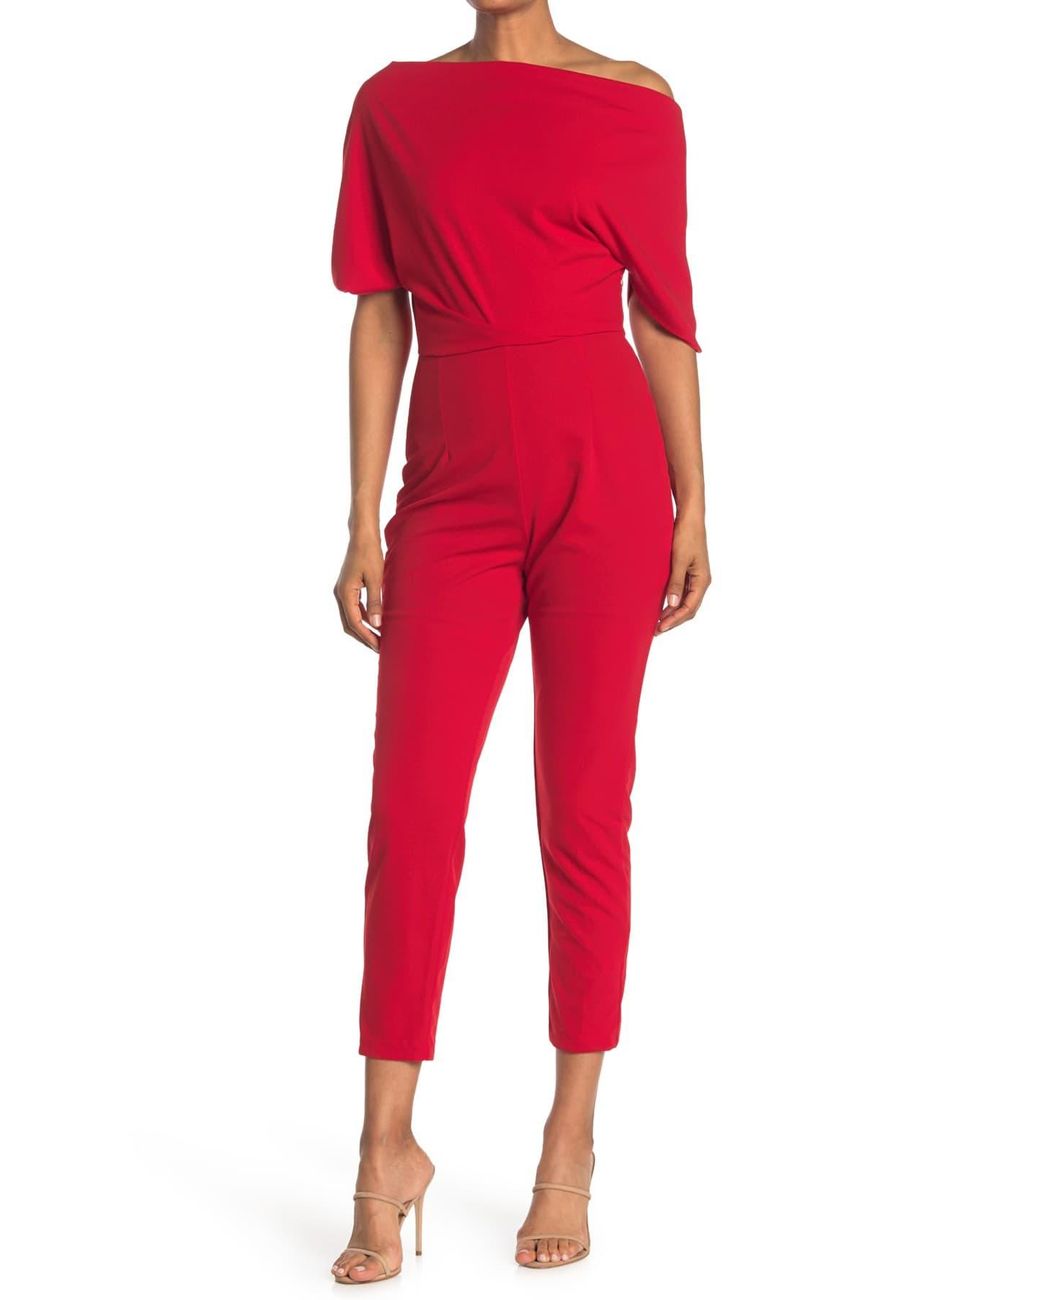 Alexia Admor Draped One-shoulder Jumpsuit in Red - Lyst